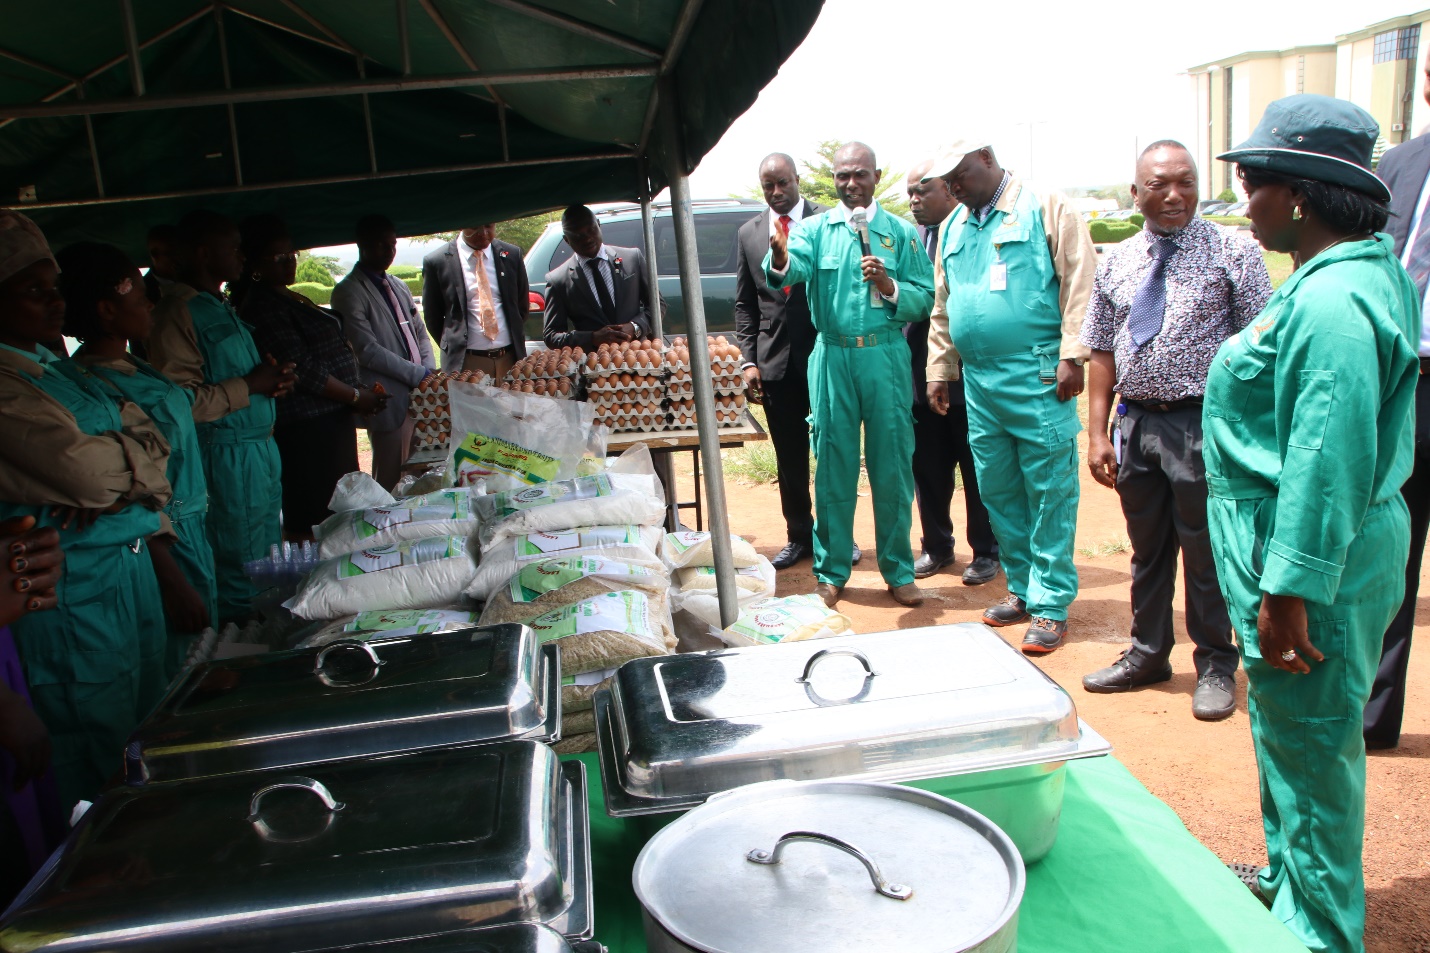 The Director, Landmark University Farms, Dr John Izebere introducing the various products from the Commercial Farm on display at the Food Fair commemorating the 2017 World Food Day